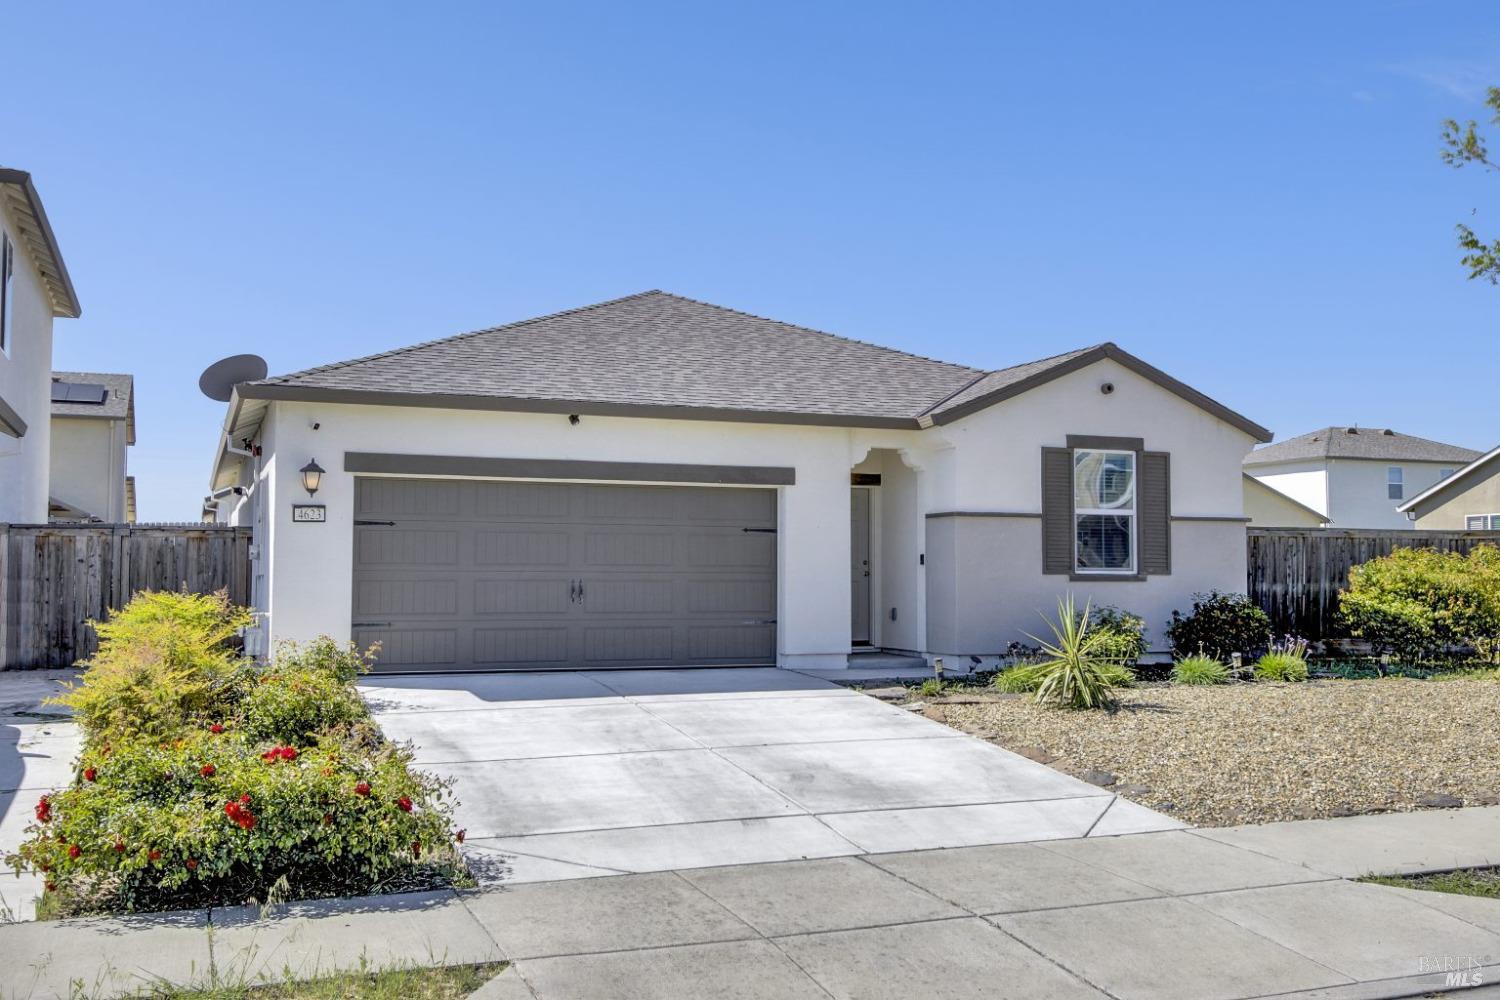 Explore 4623 Lincoln Landing in Rio Vista!  This single-story gem offers 3 bedrooms, 2 baths, and 15